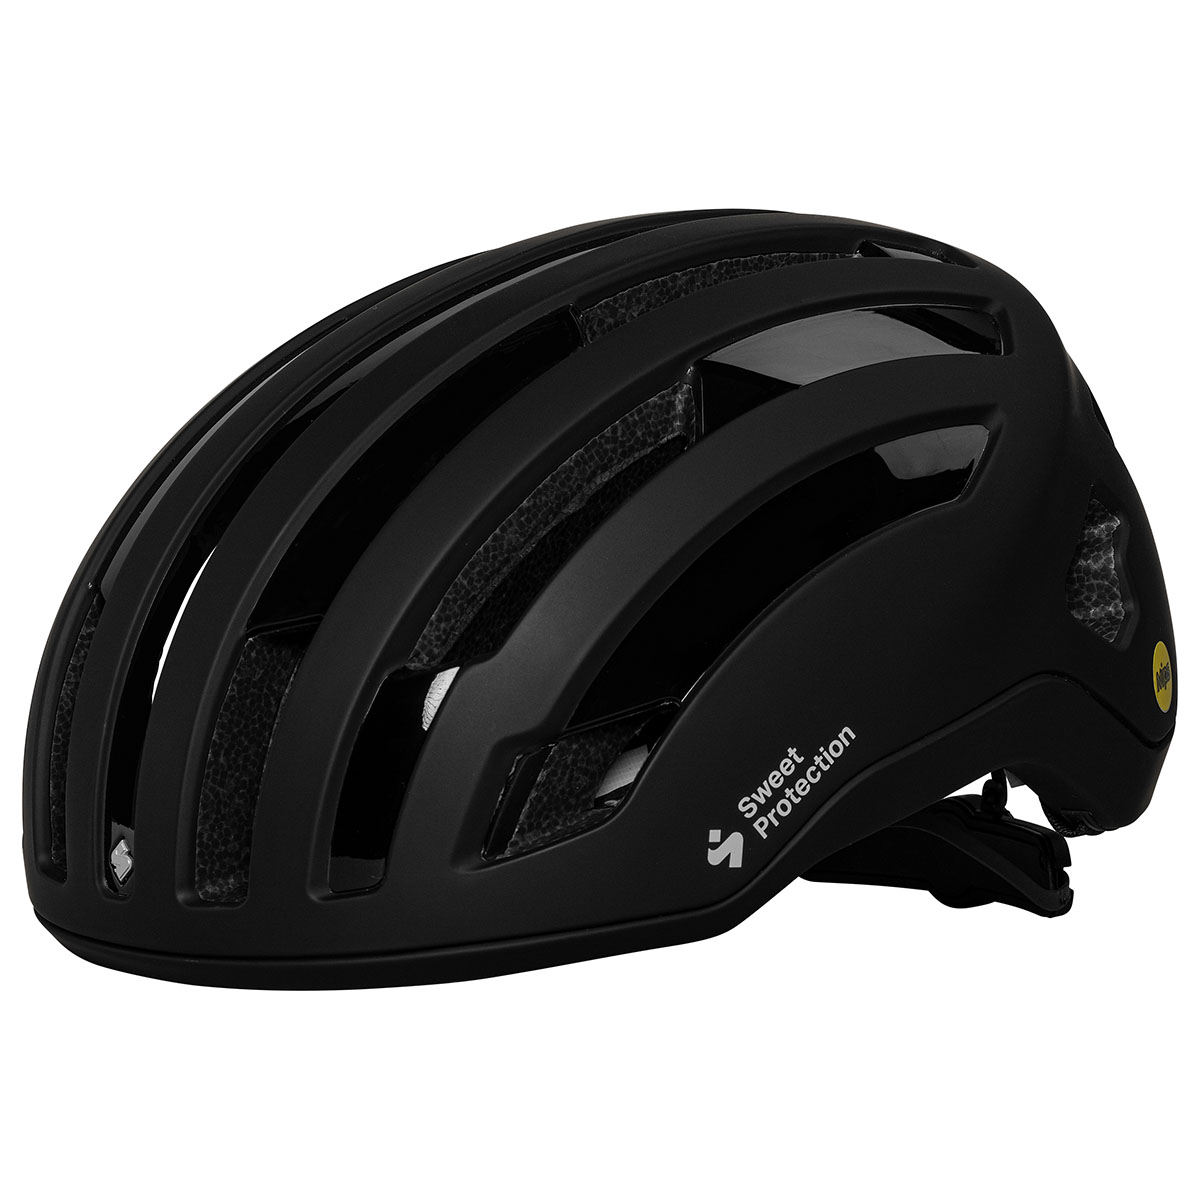 CASQUE SWEET PROTECTION OUTRIDER MIPS NOIR MAT LARGE